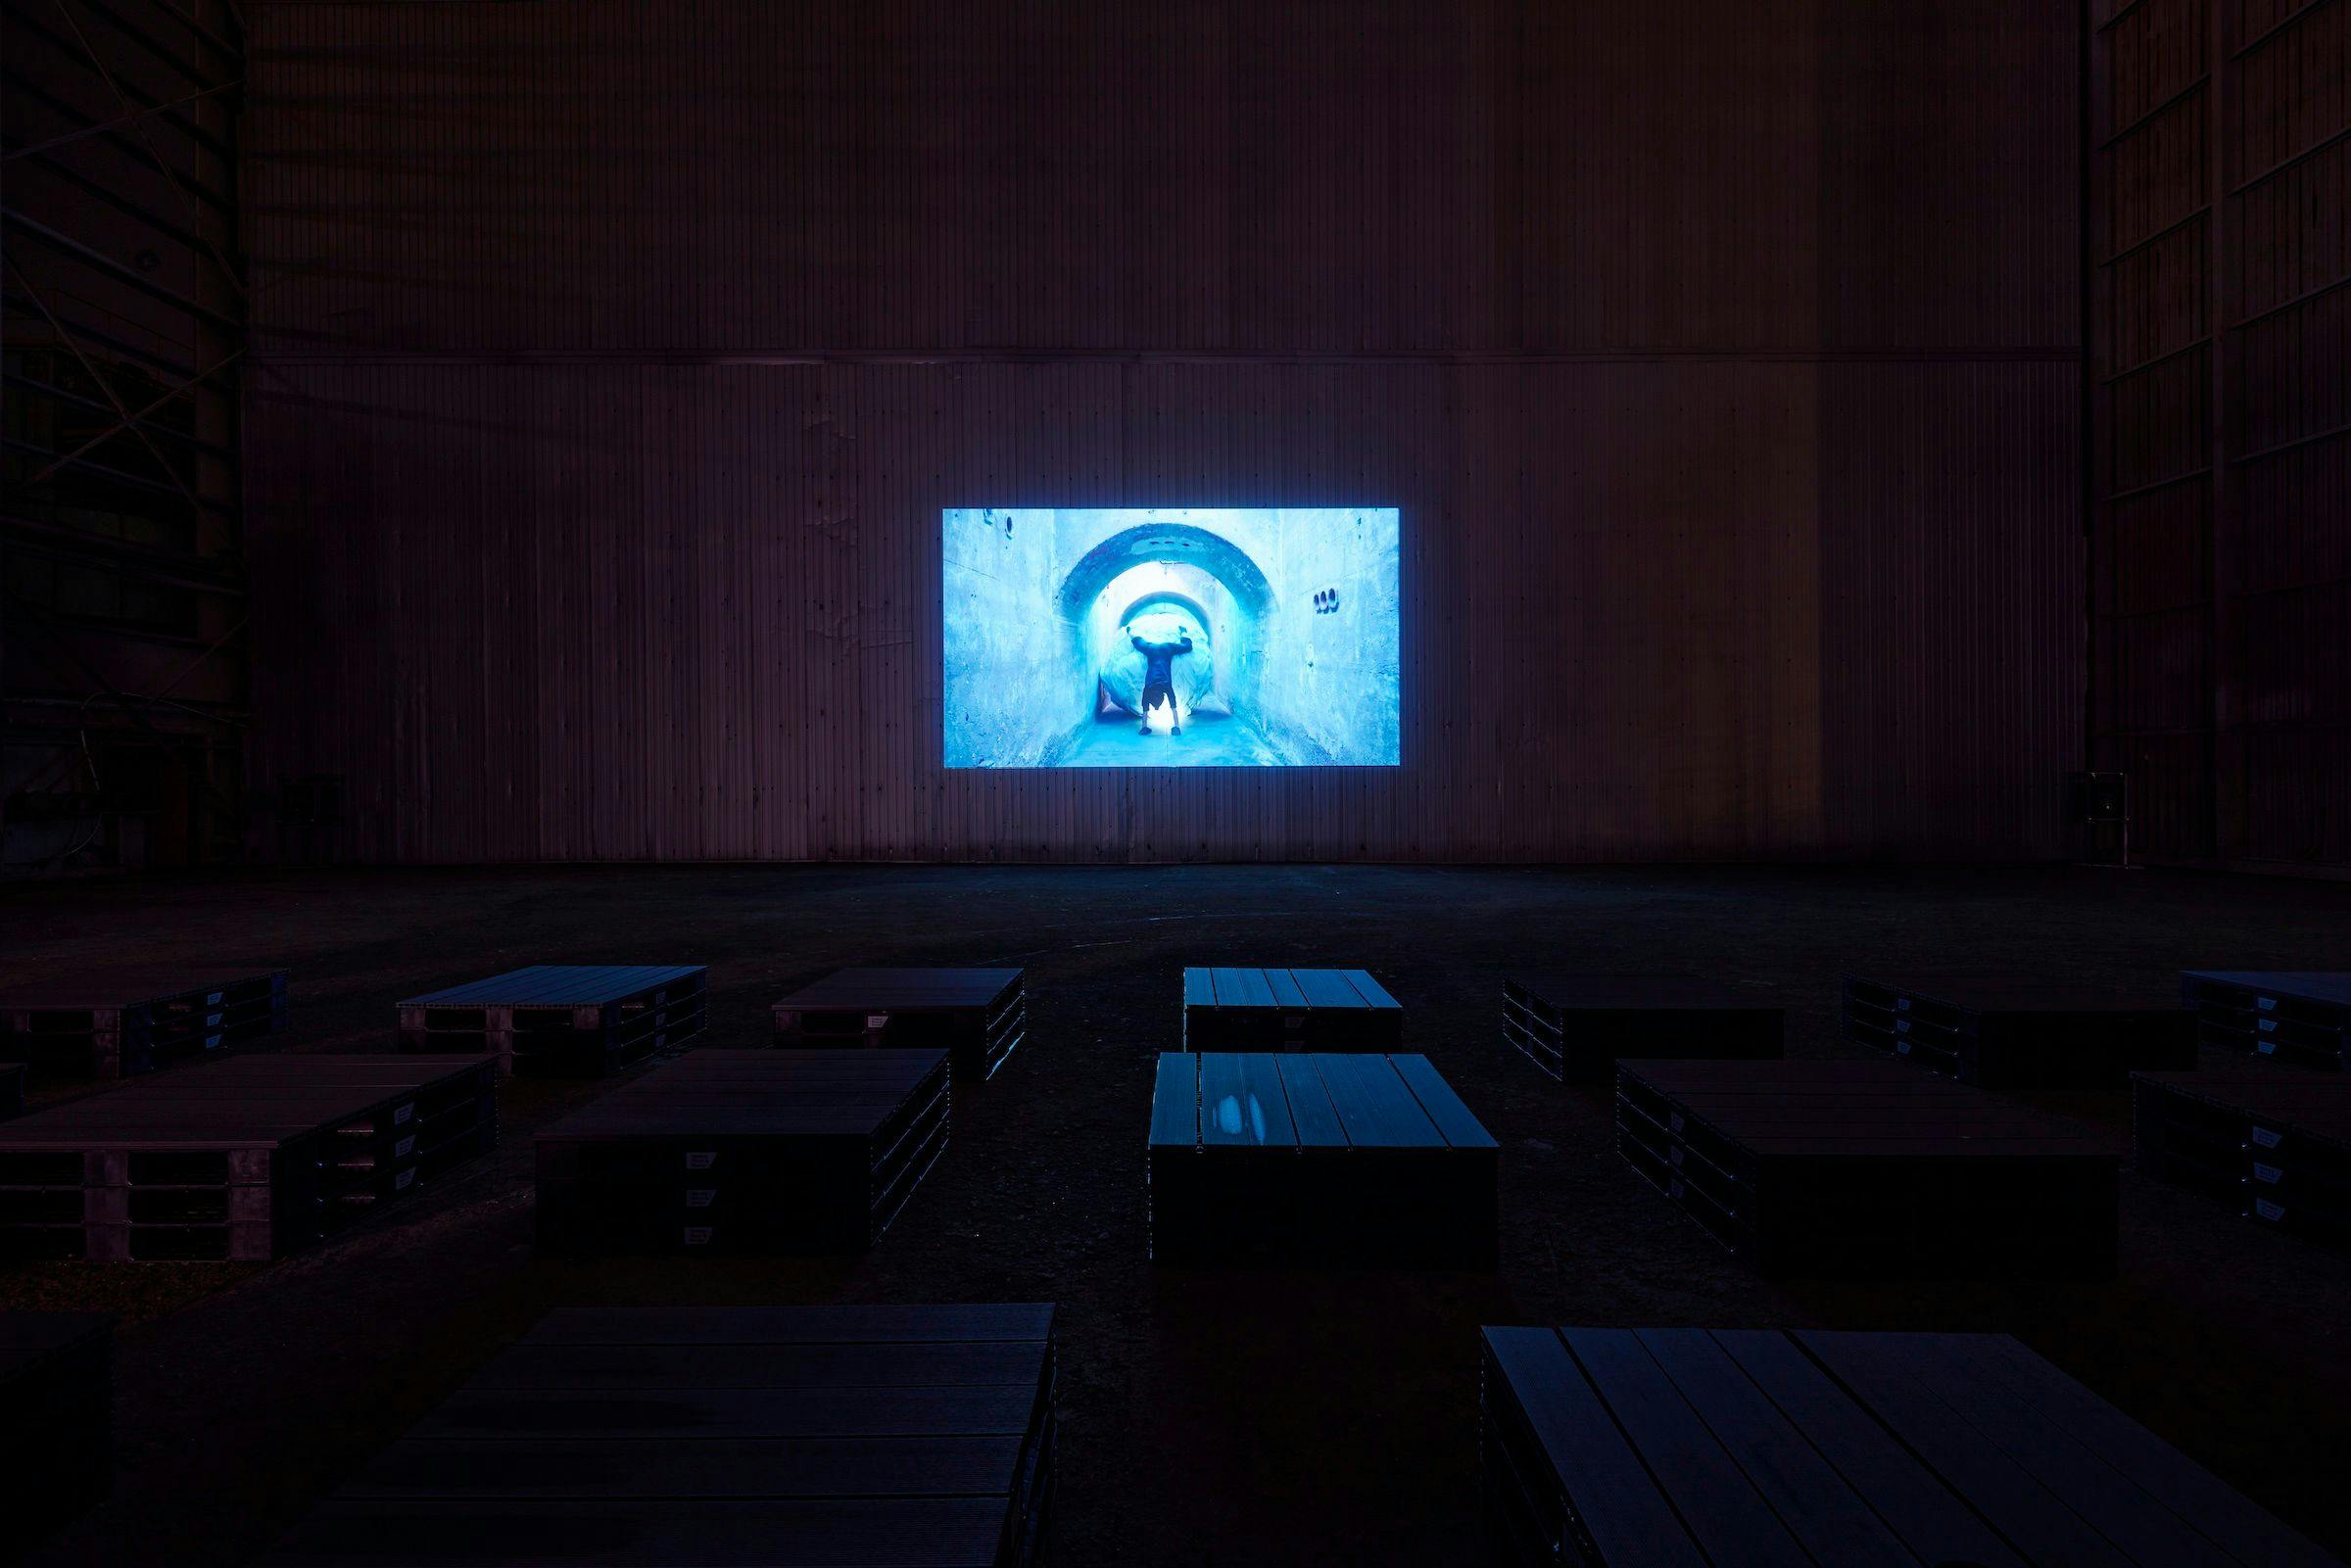 an installation of a video projection in an art gallery. The walls and floor are brown and there are a number of plan chest draws in front of the projector